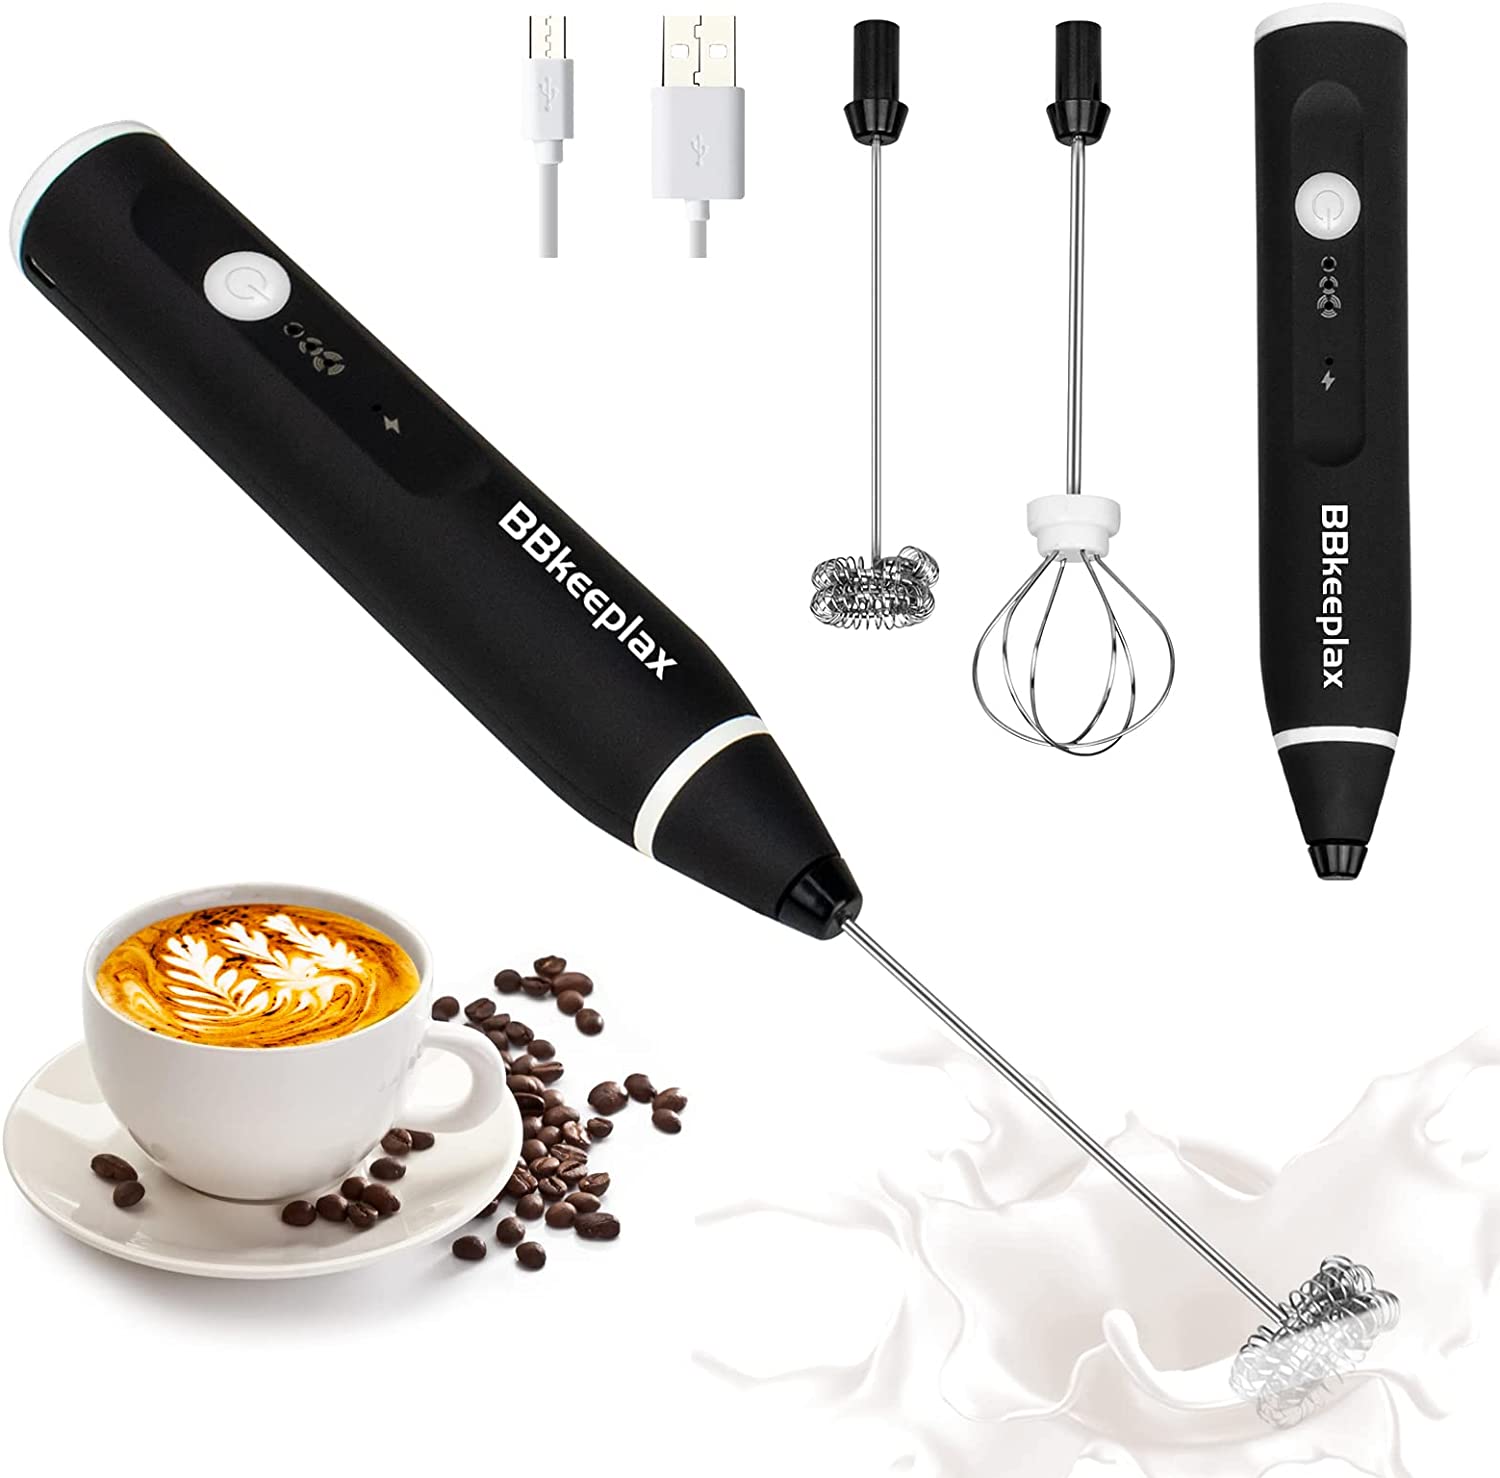 ElitaPro ULTRA Milk Frother with DOUBLE WHISK with Detachable EGG